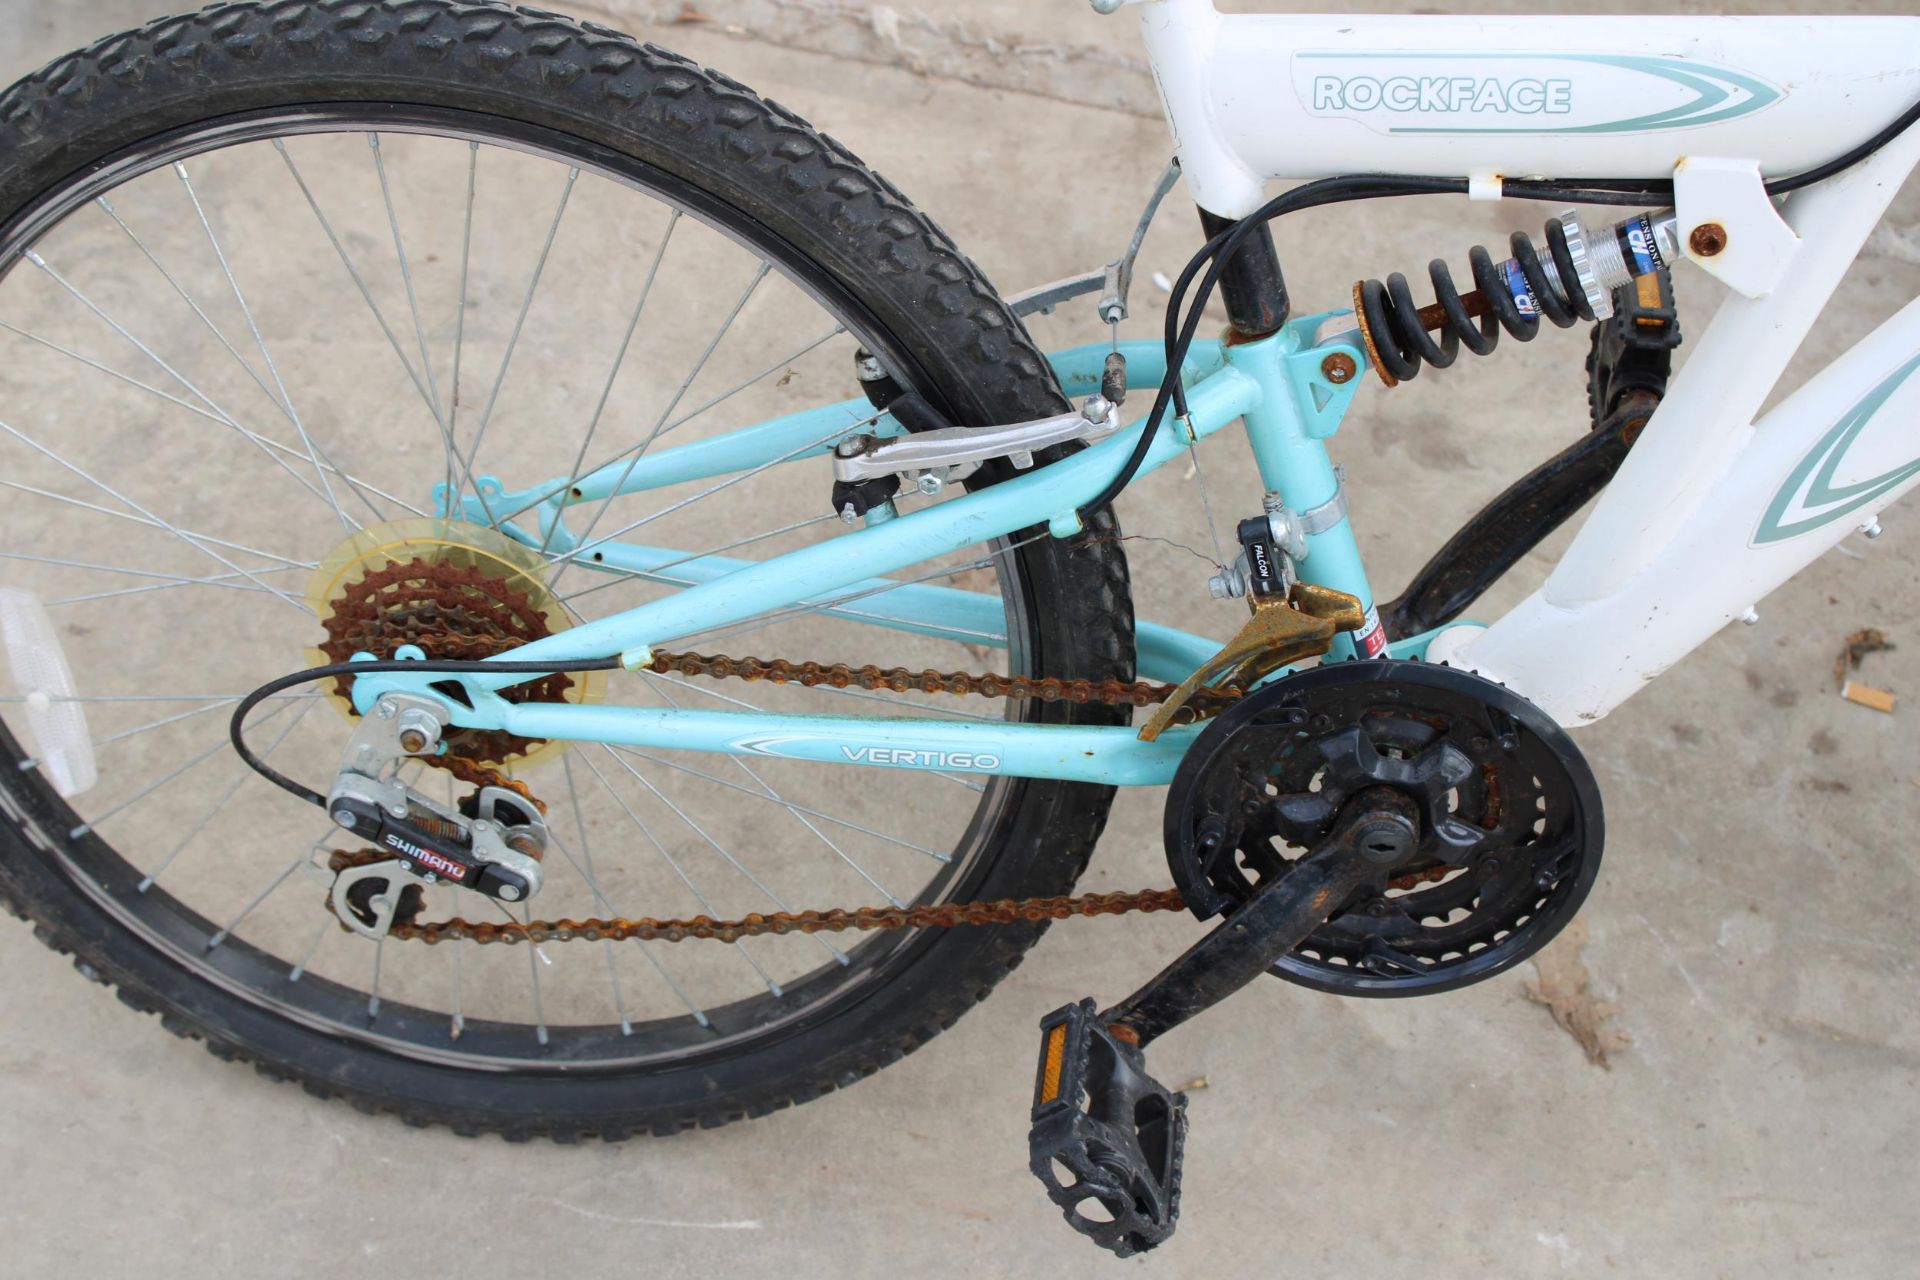 A ROCKFACE CHILDS MOUNTAIN BIKE WITH FRONT AND REAR SUSPENSION AND 18 SPEED SHIMANO GEAR SYSTEMS - Image 3 of 4